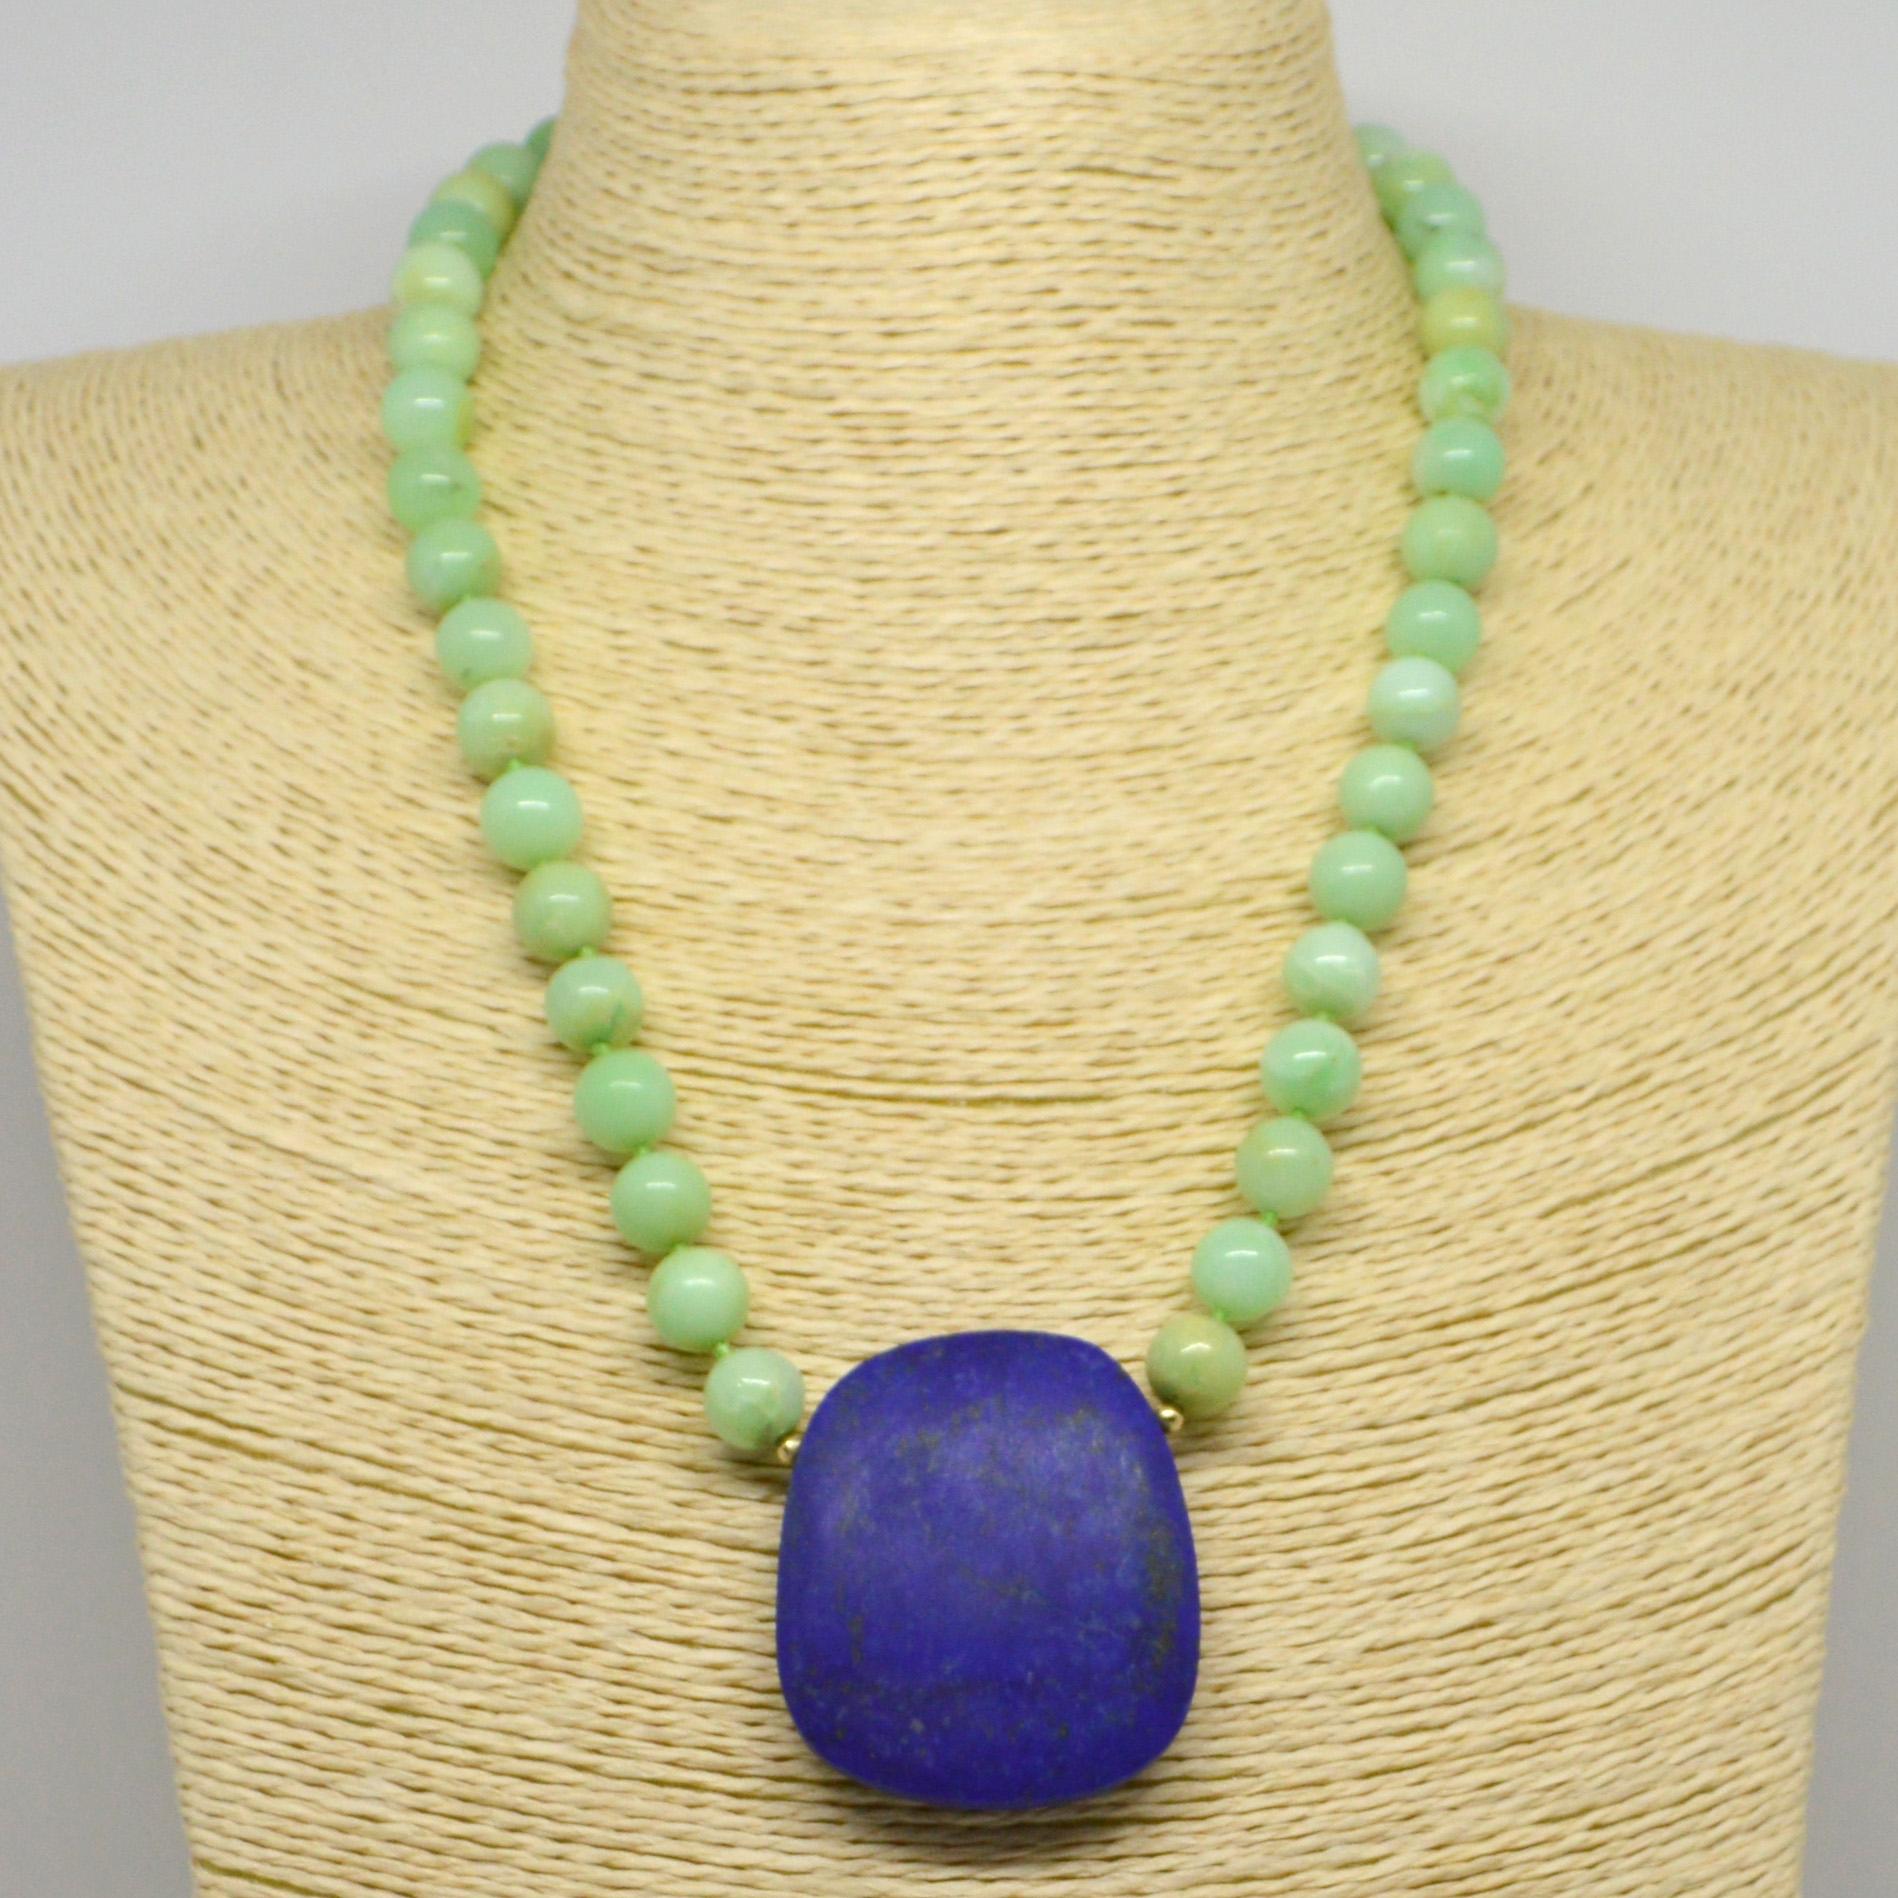 Soft green Australian Chrysophase beads 10mm with a stunning matt natural Lapis Lazuli oval pendant, 3mm Round Gold filled beads with a 55mm Gold Plate Sterling Silver Hook clasp, hand knotted for strength and durability.

Finished necklace measures